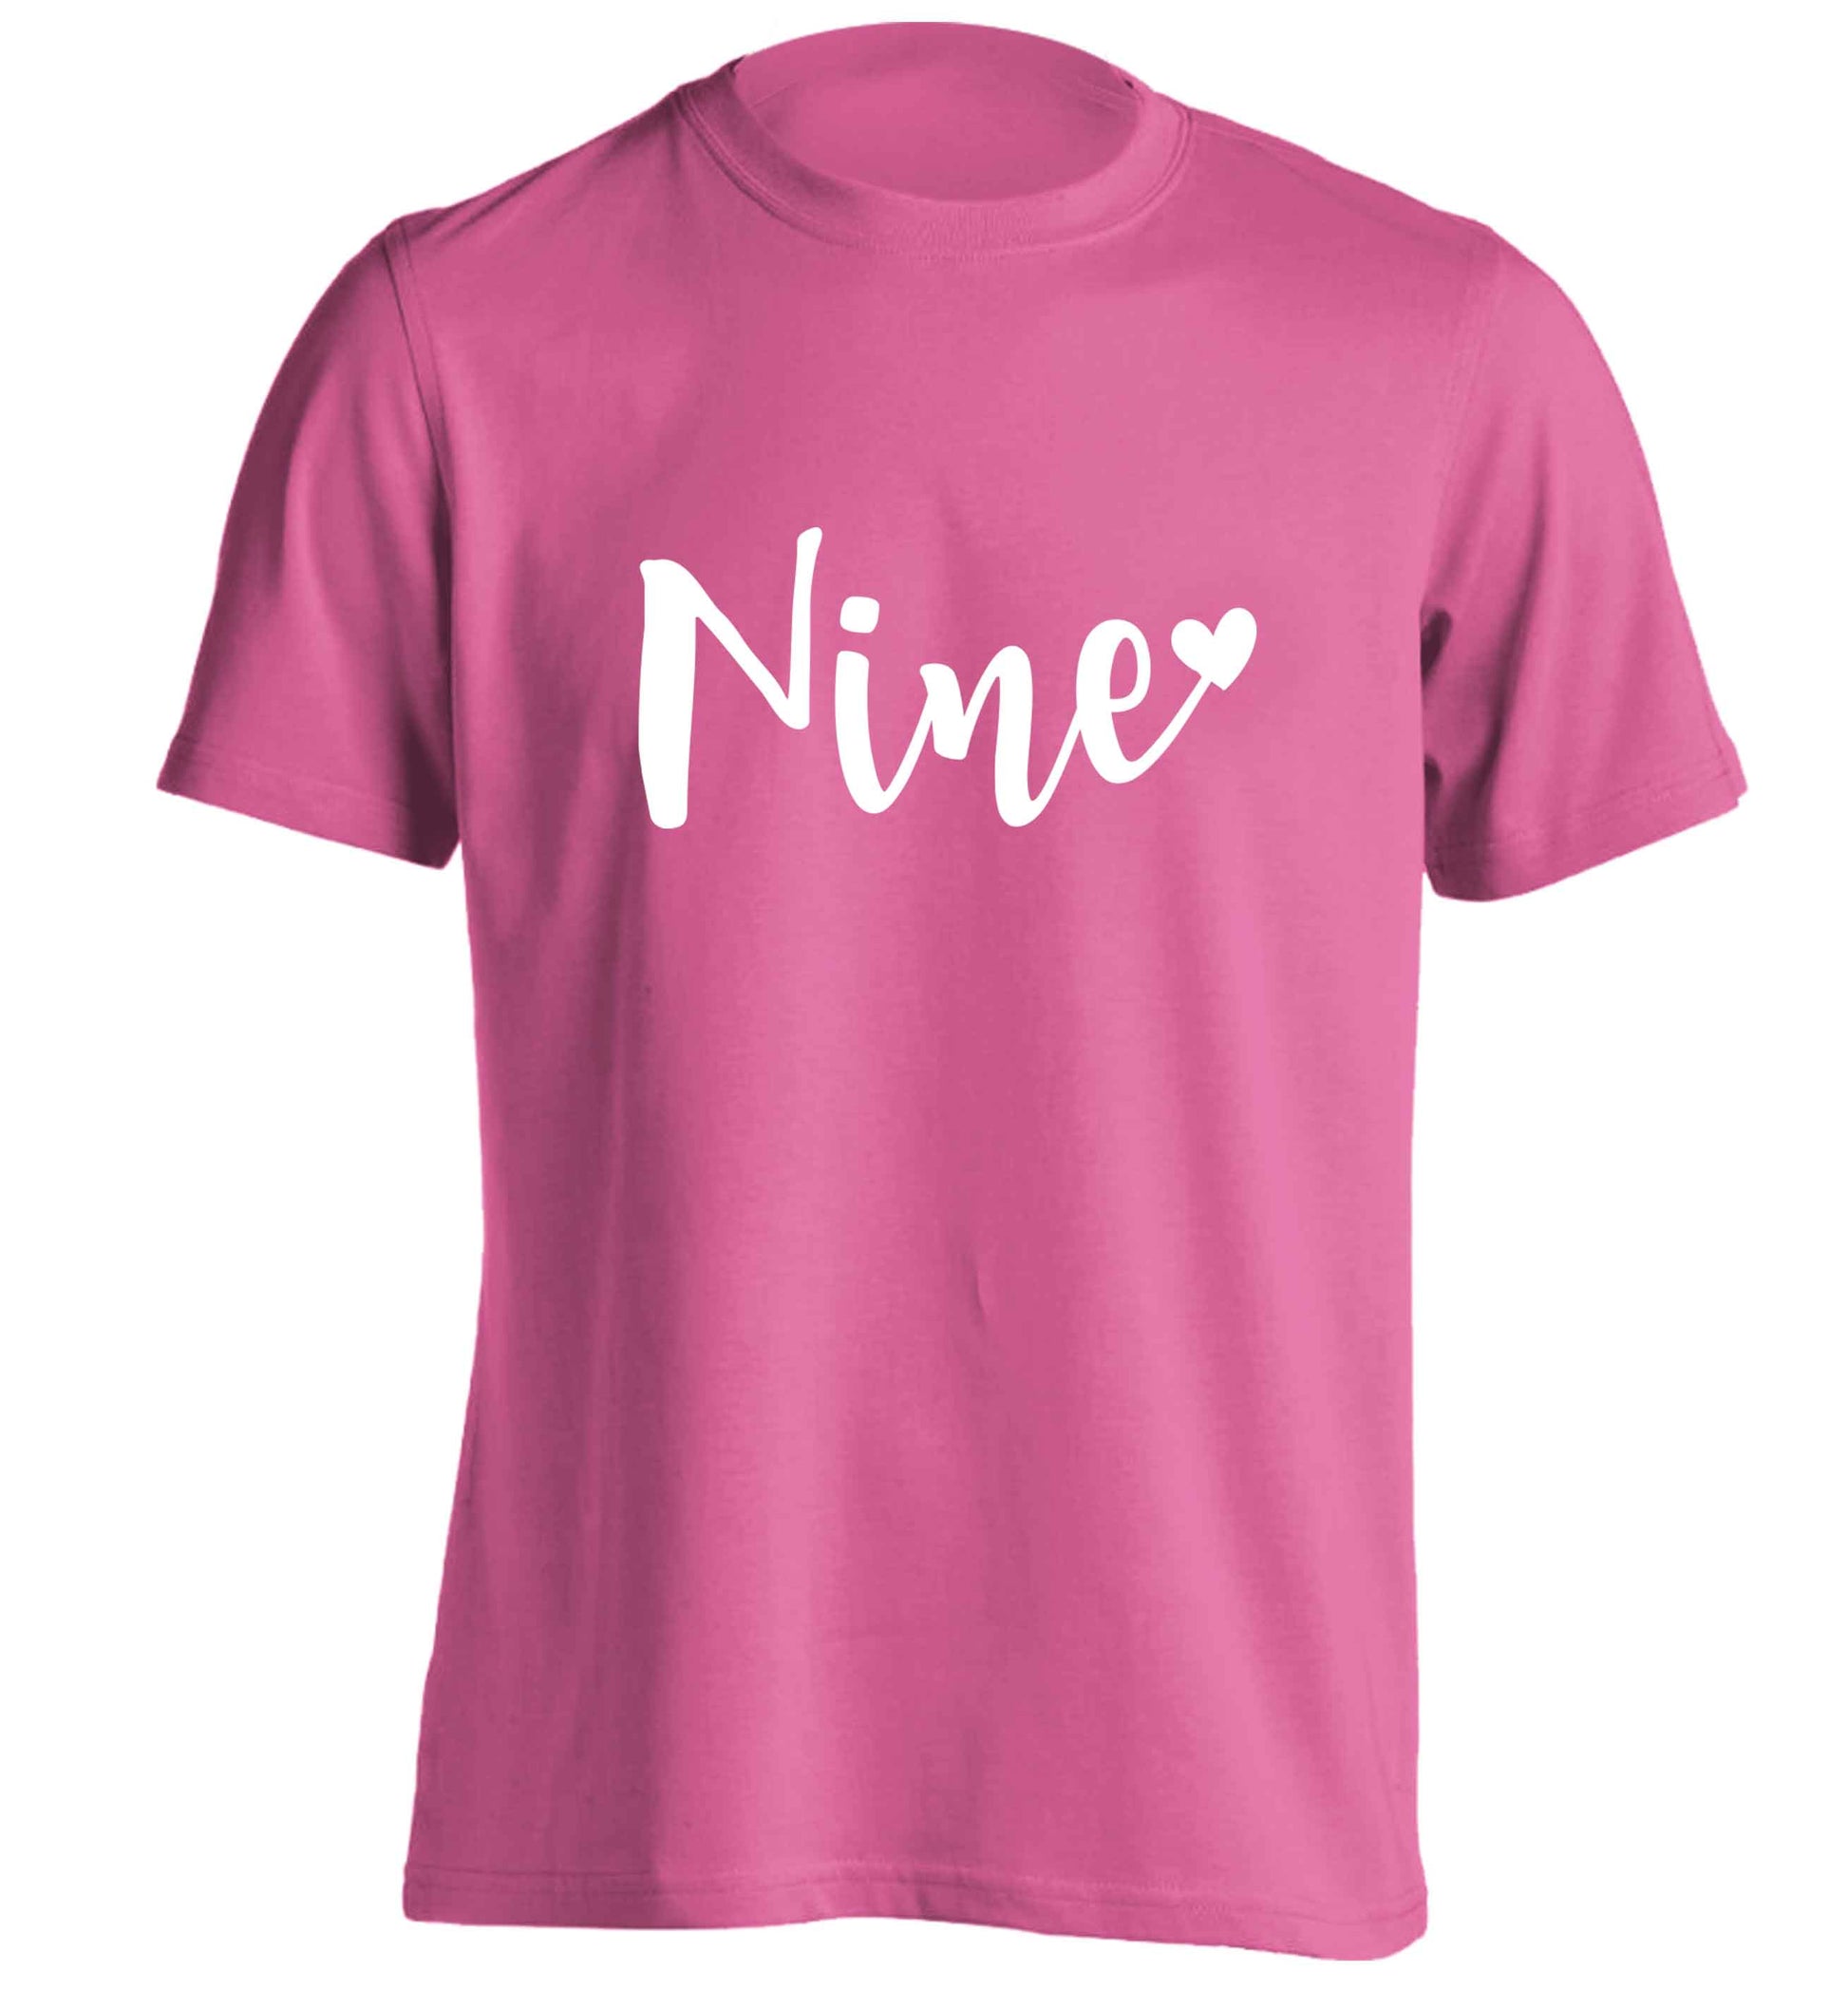 Nine and heart adults unisex pink Tshirt 2XL